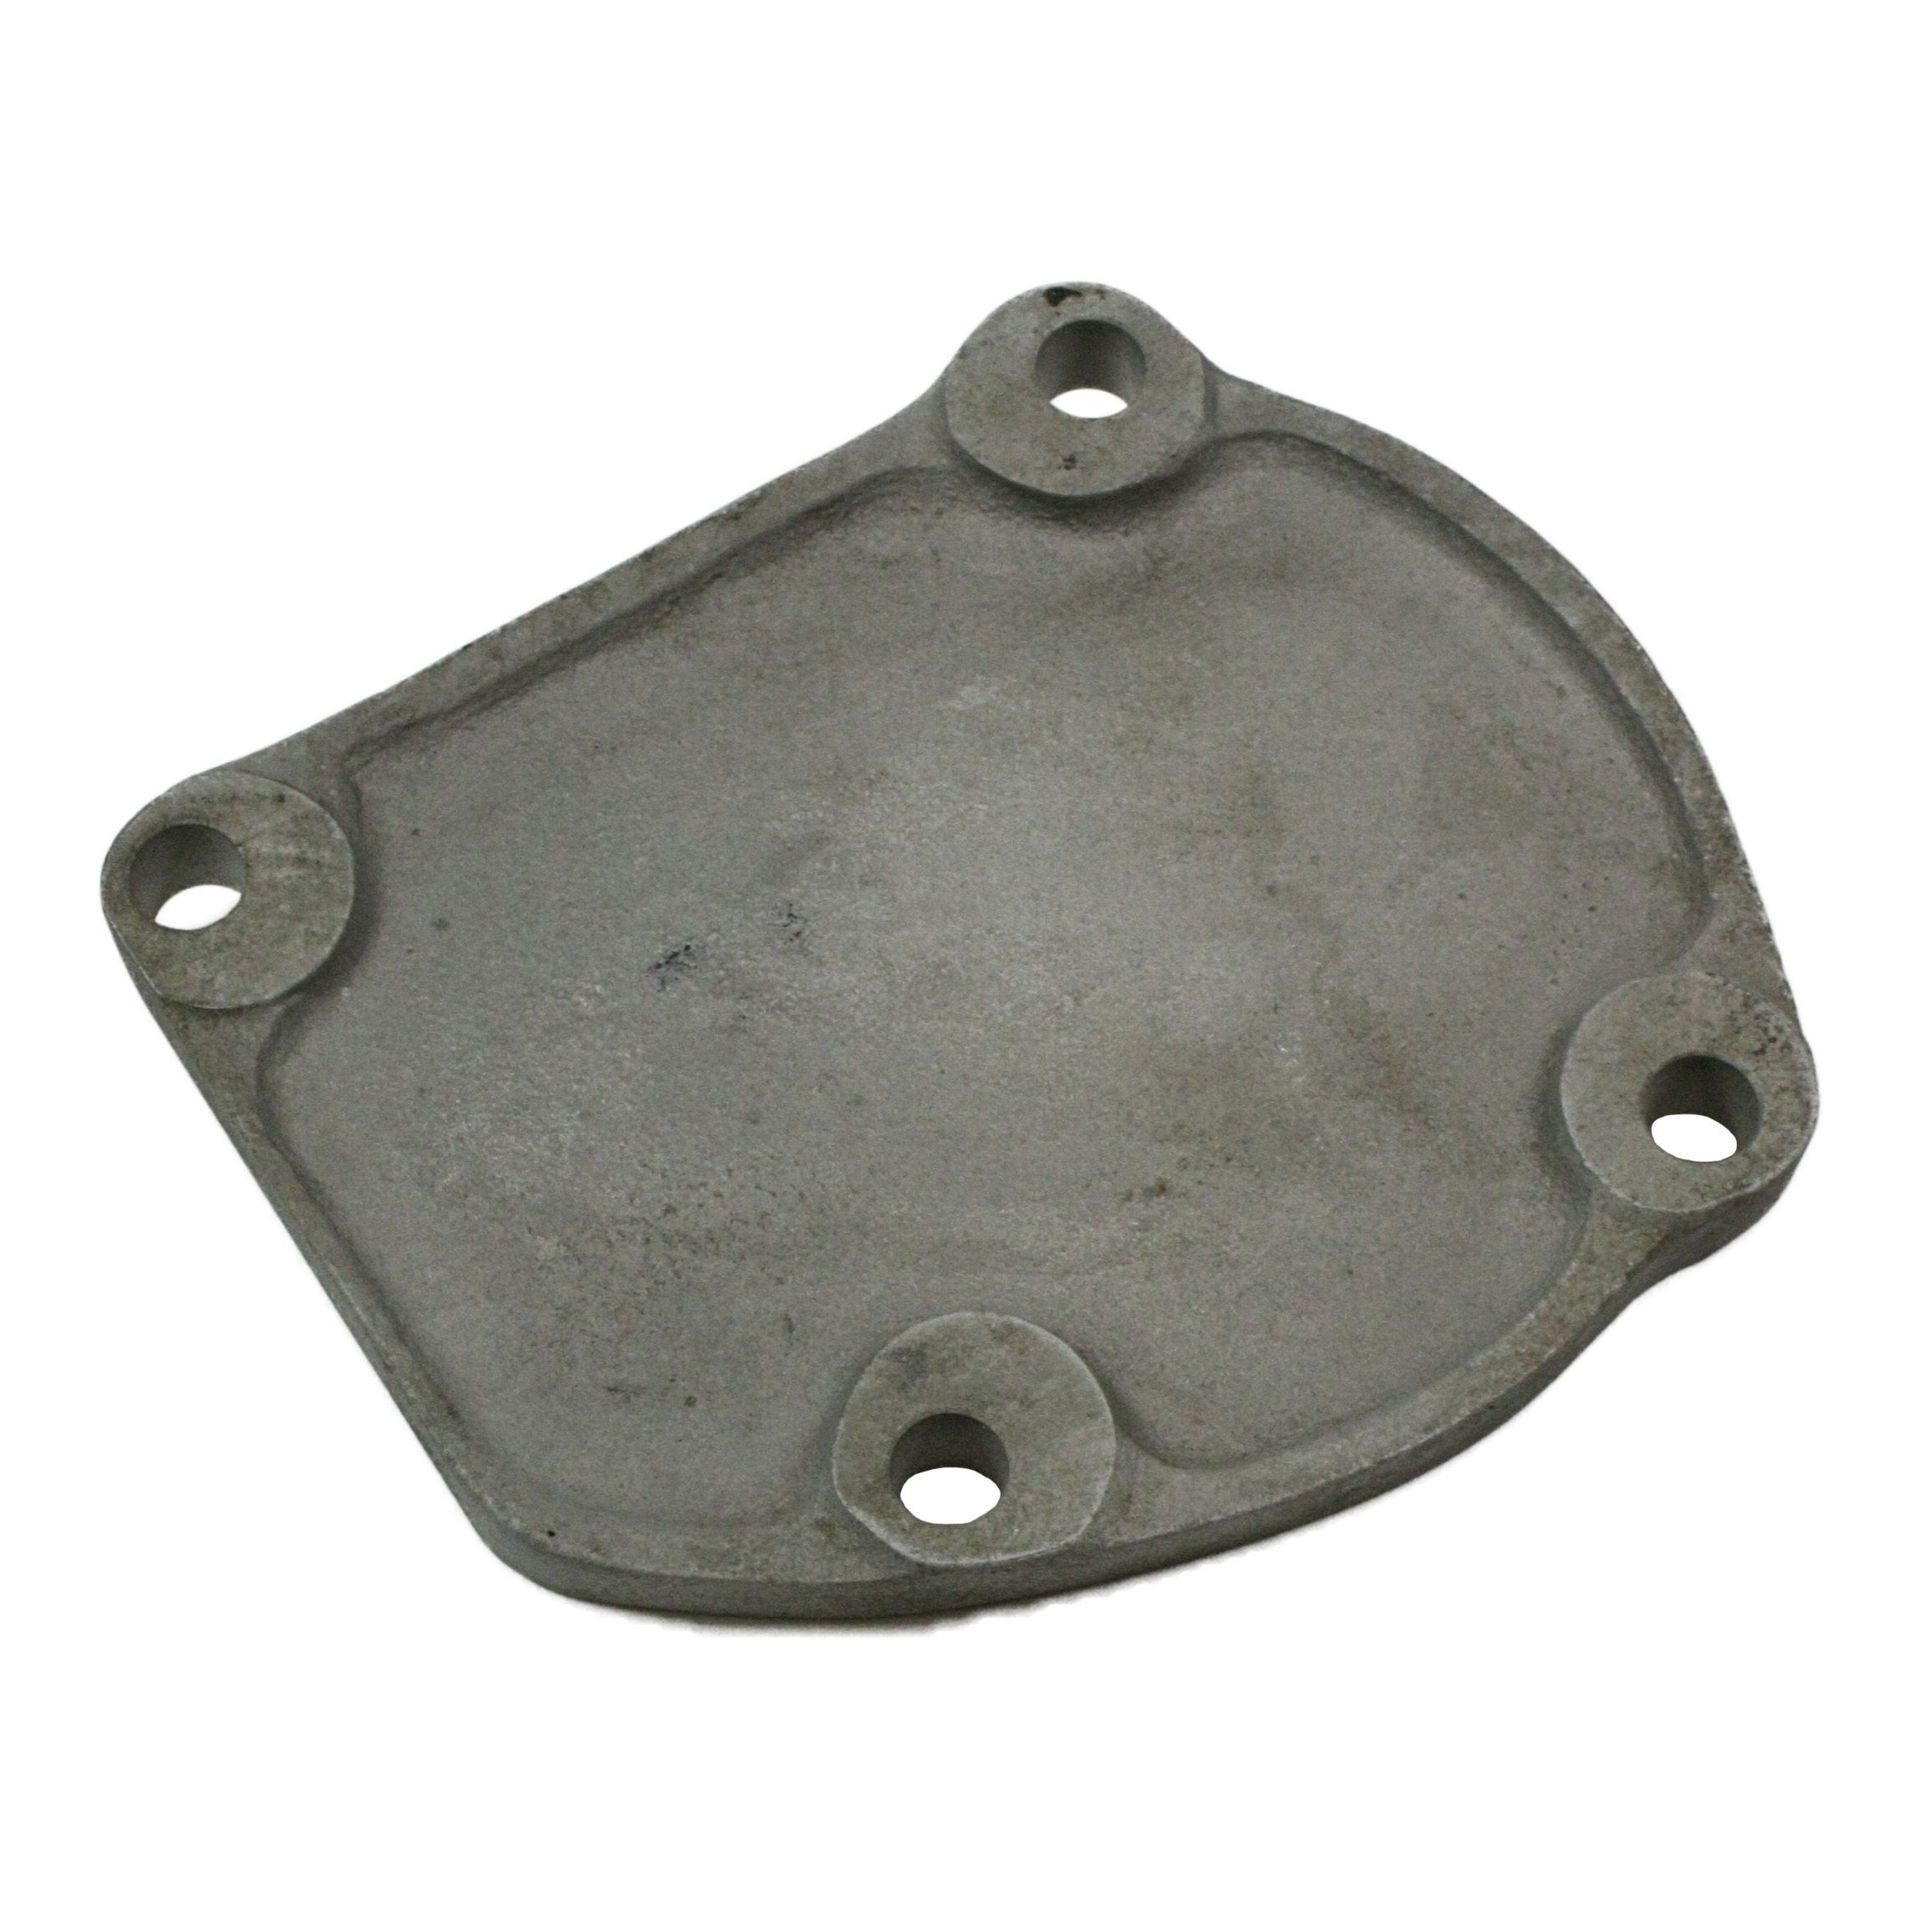 Oil Pump Front Cover Plate 250/275 Late